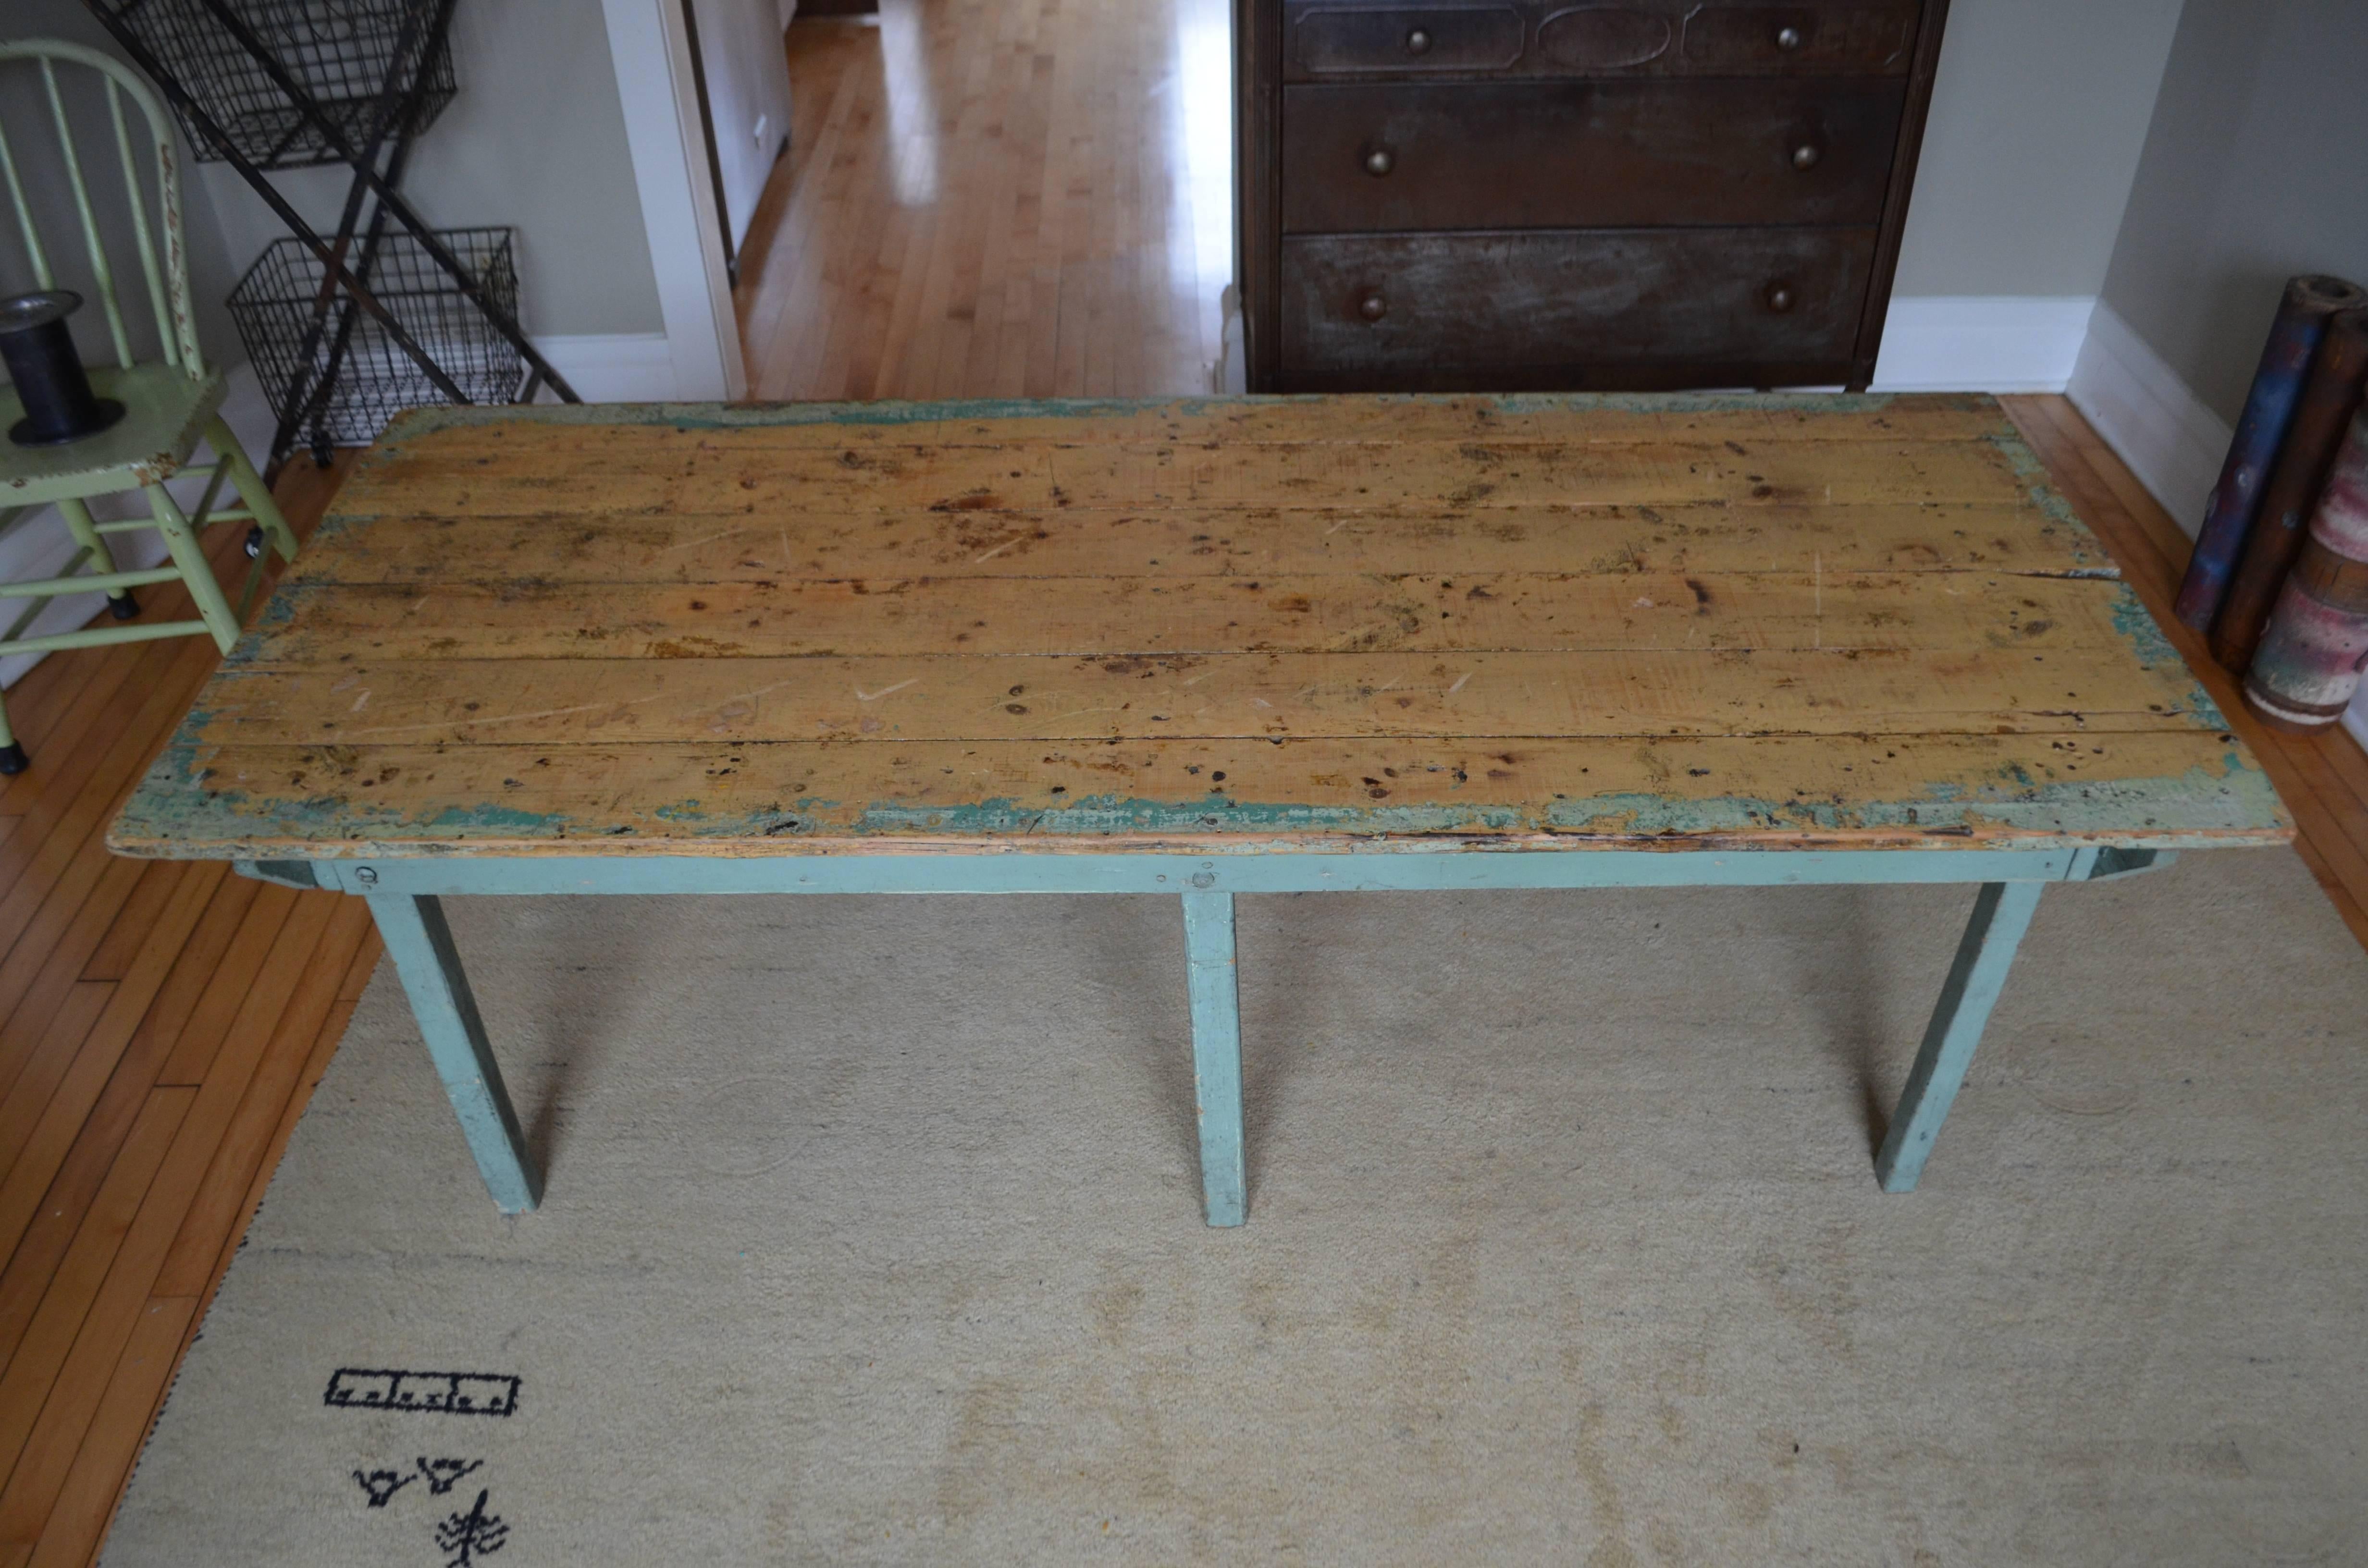 American Children's Furniture: Vintage Wooden Table from Midwestern Schoolhouse